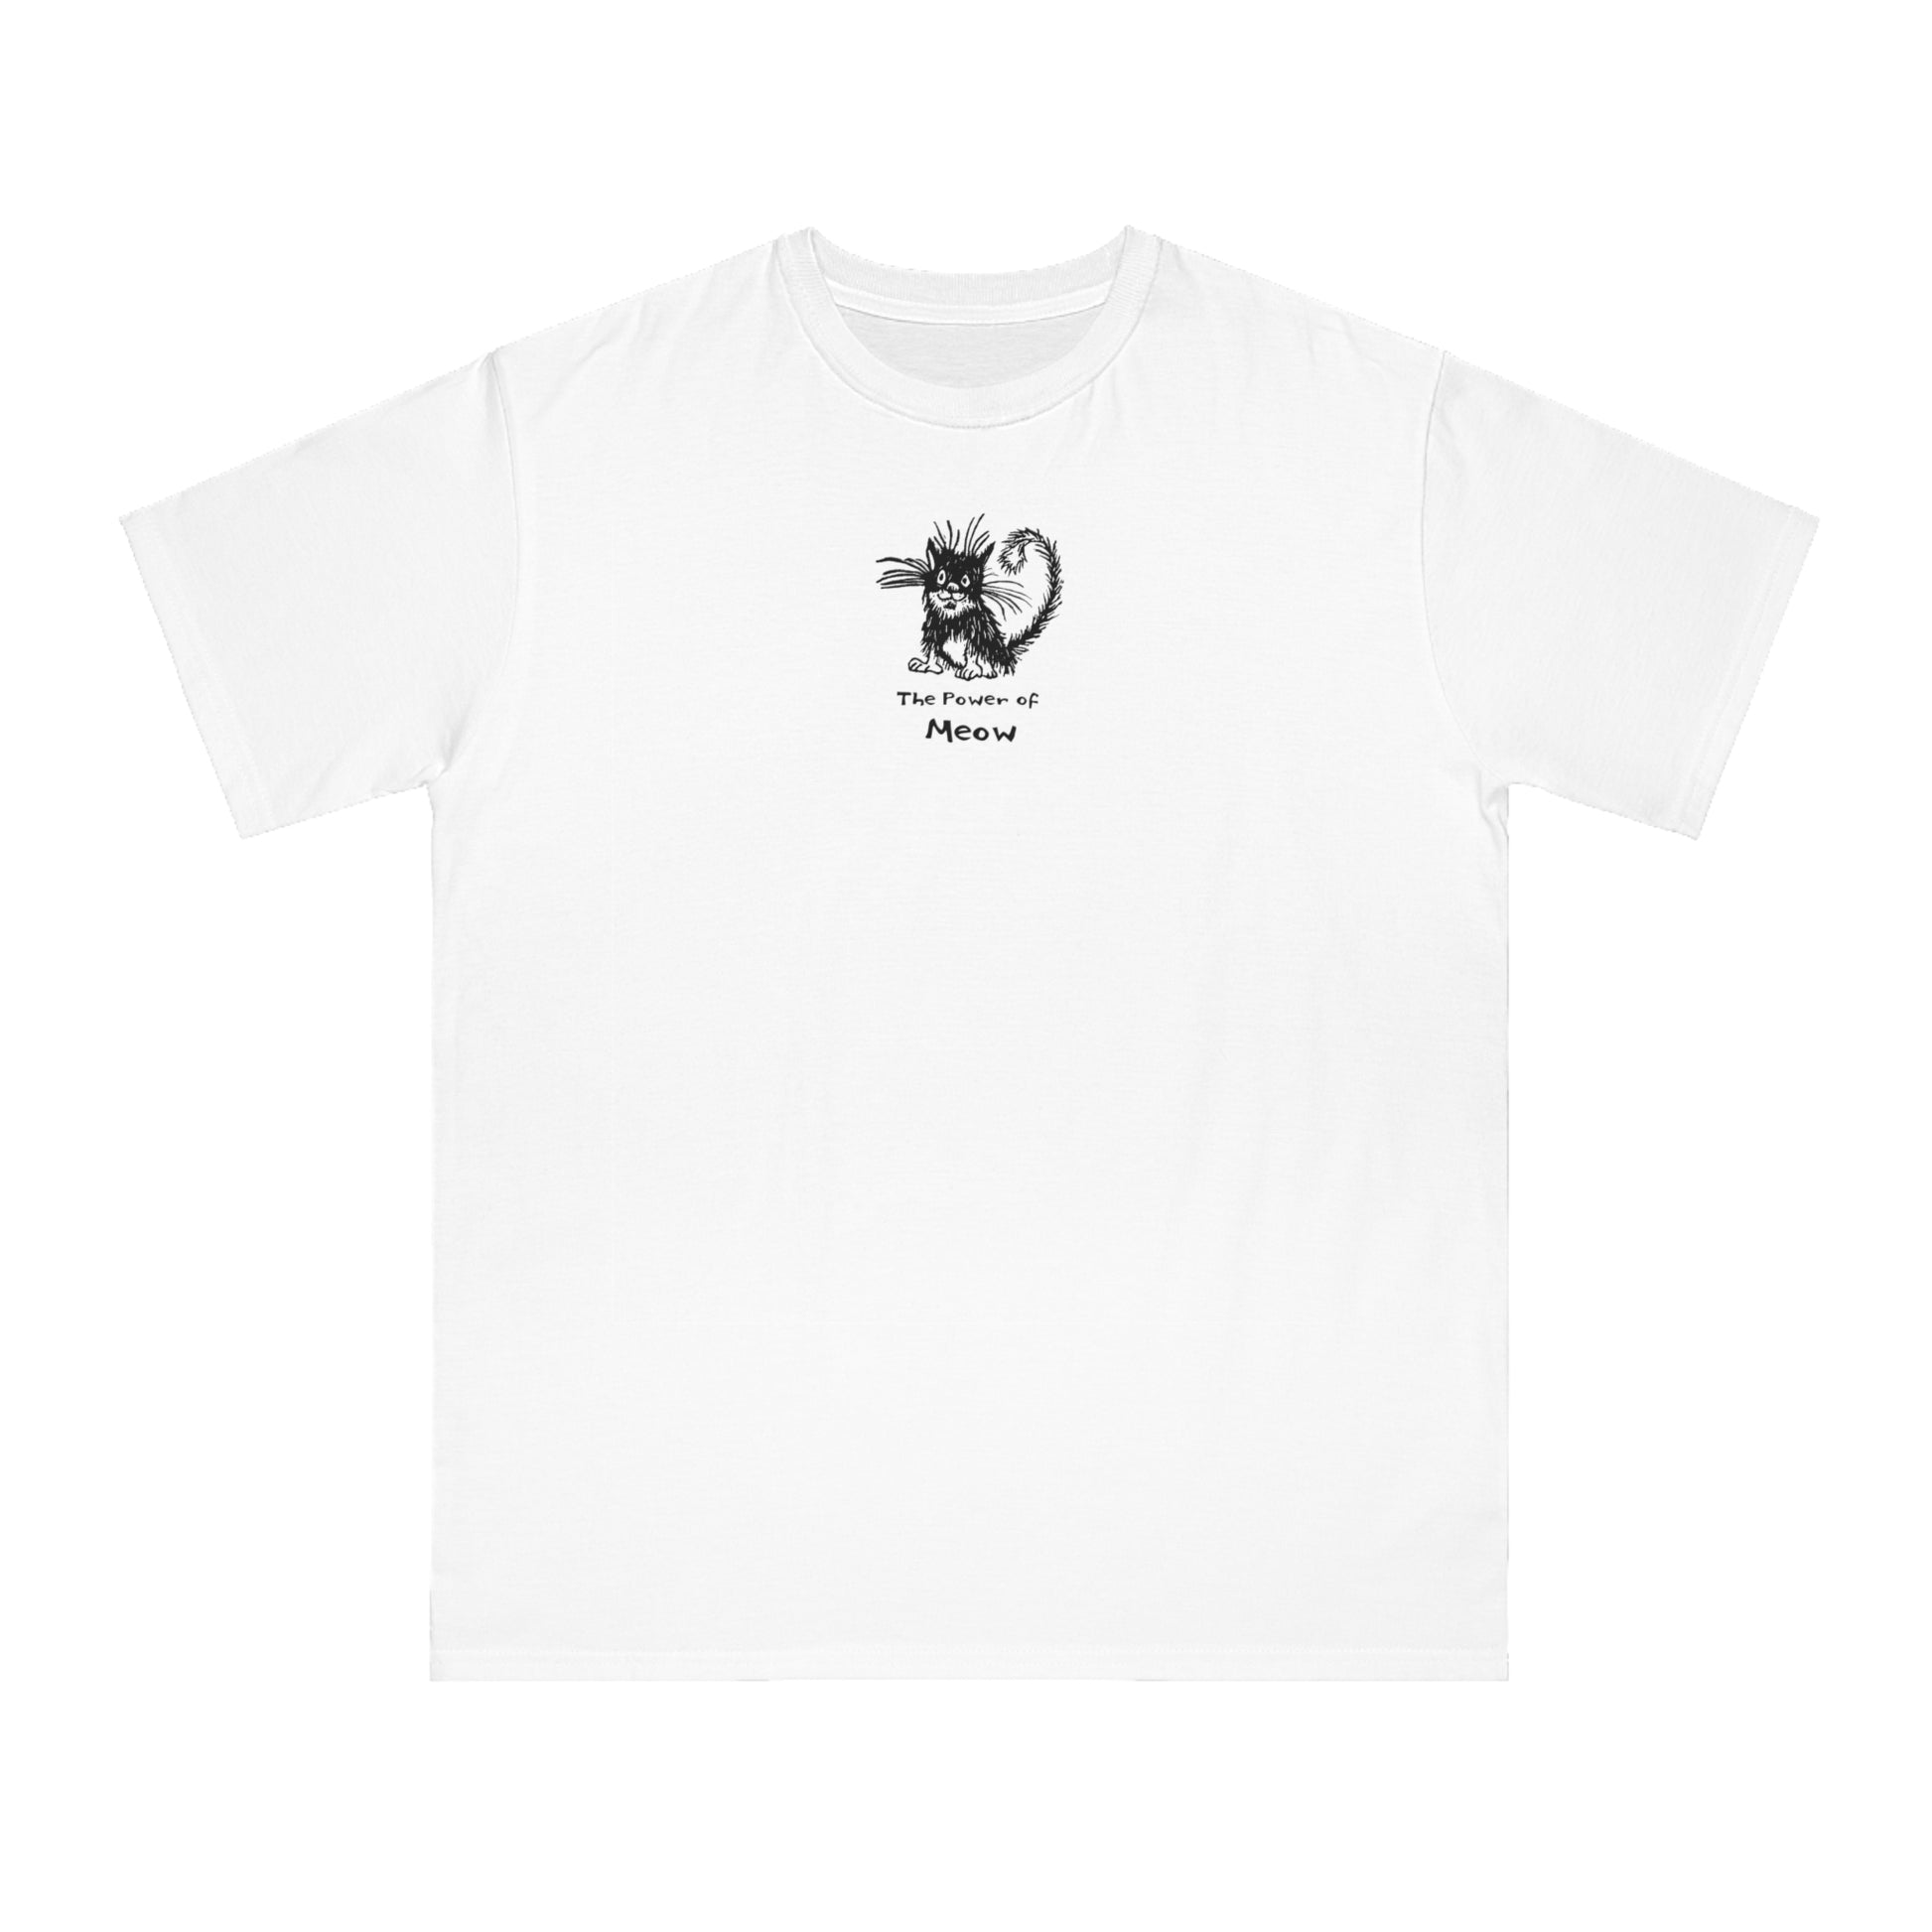 Black and white cat sitting on white color unisex men's t-shirt.  Text under reads The Power of Meow